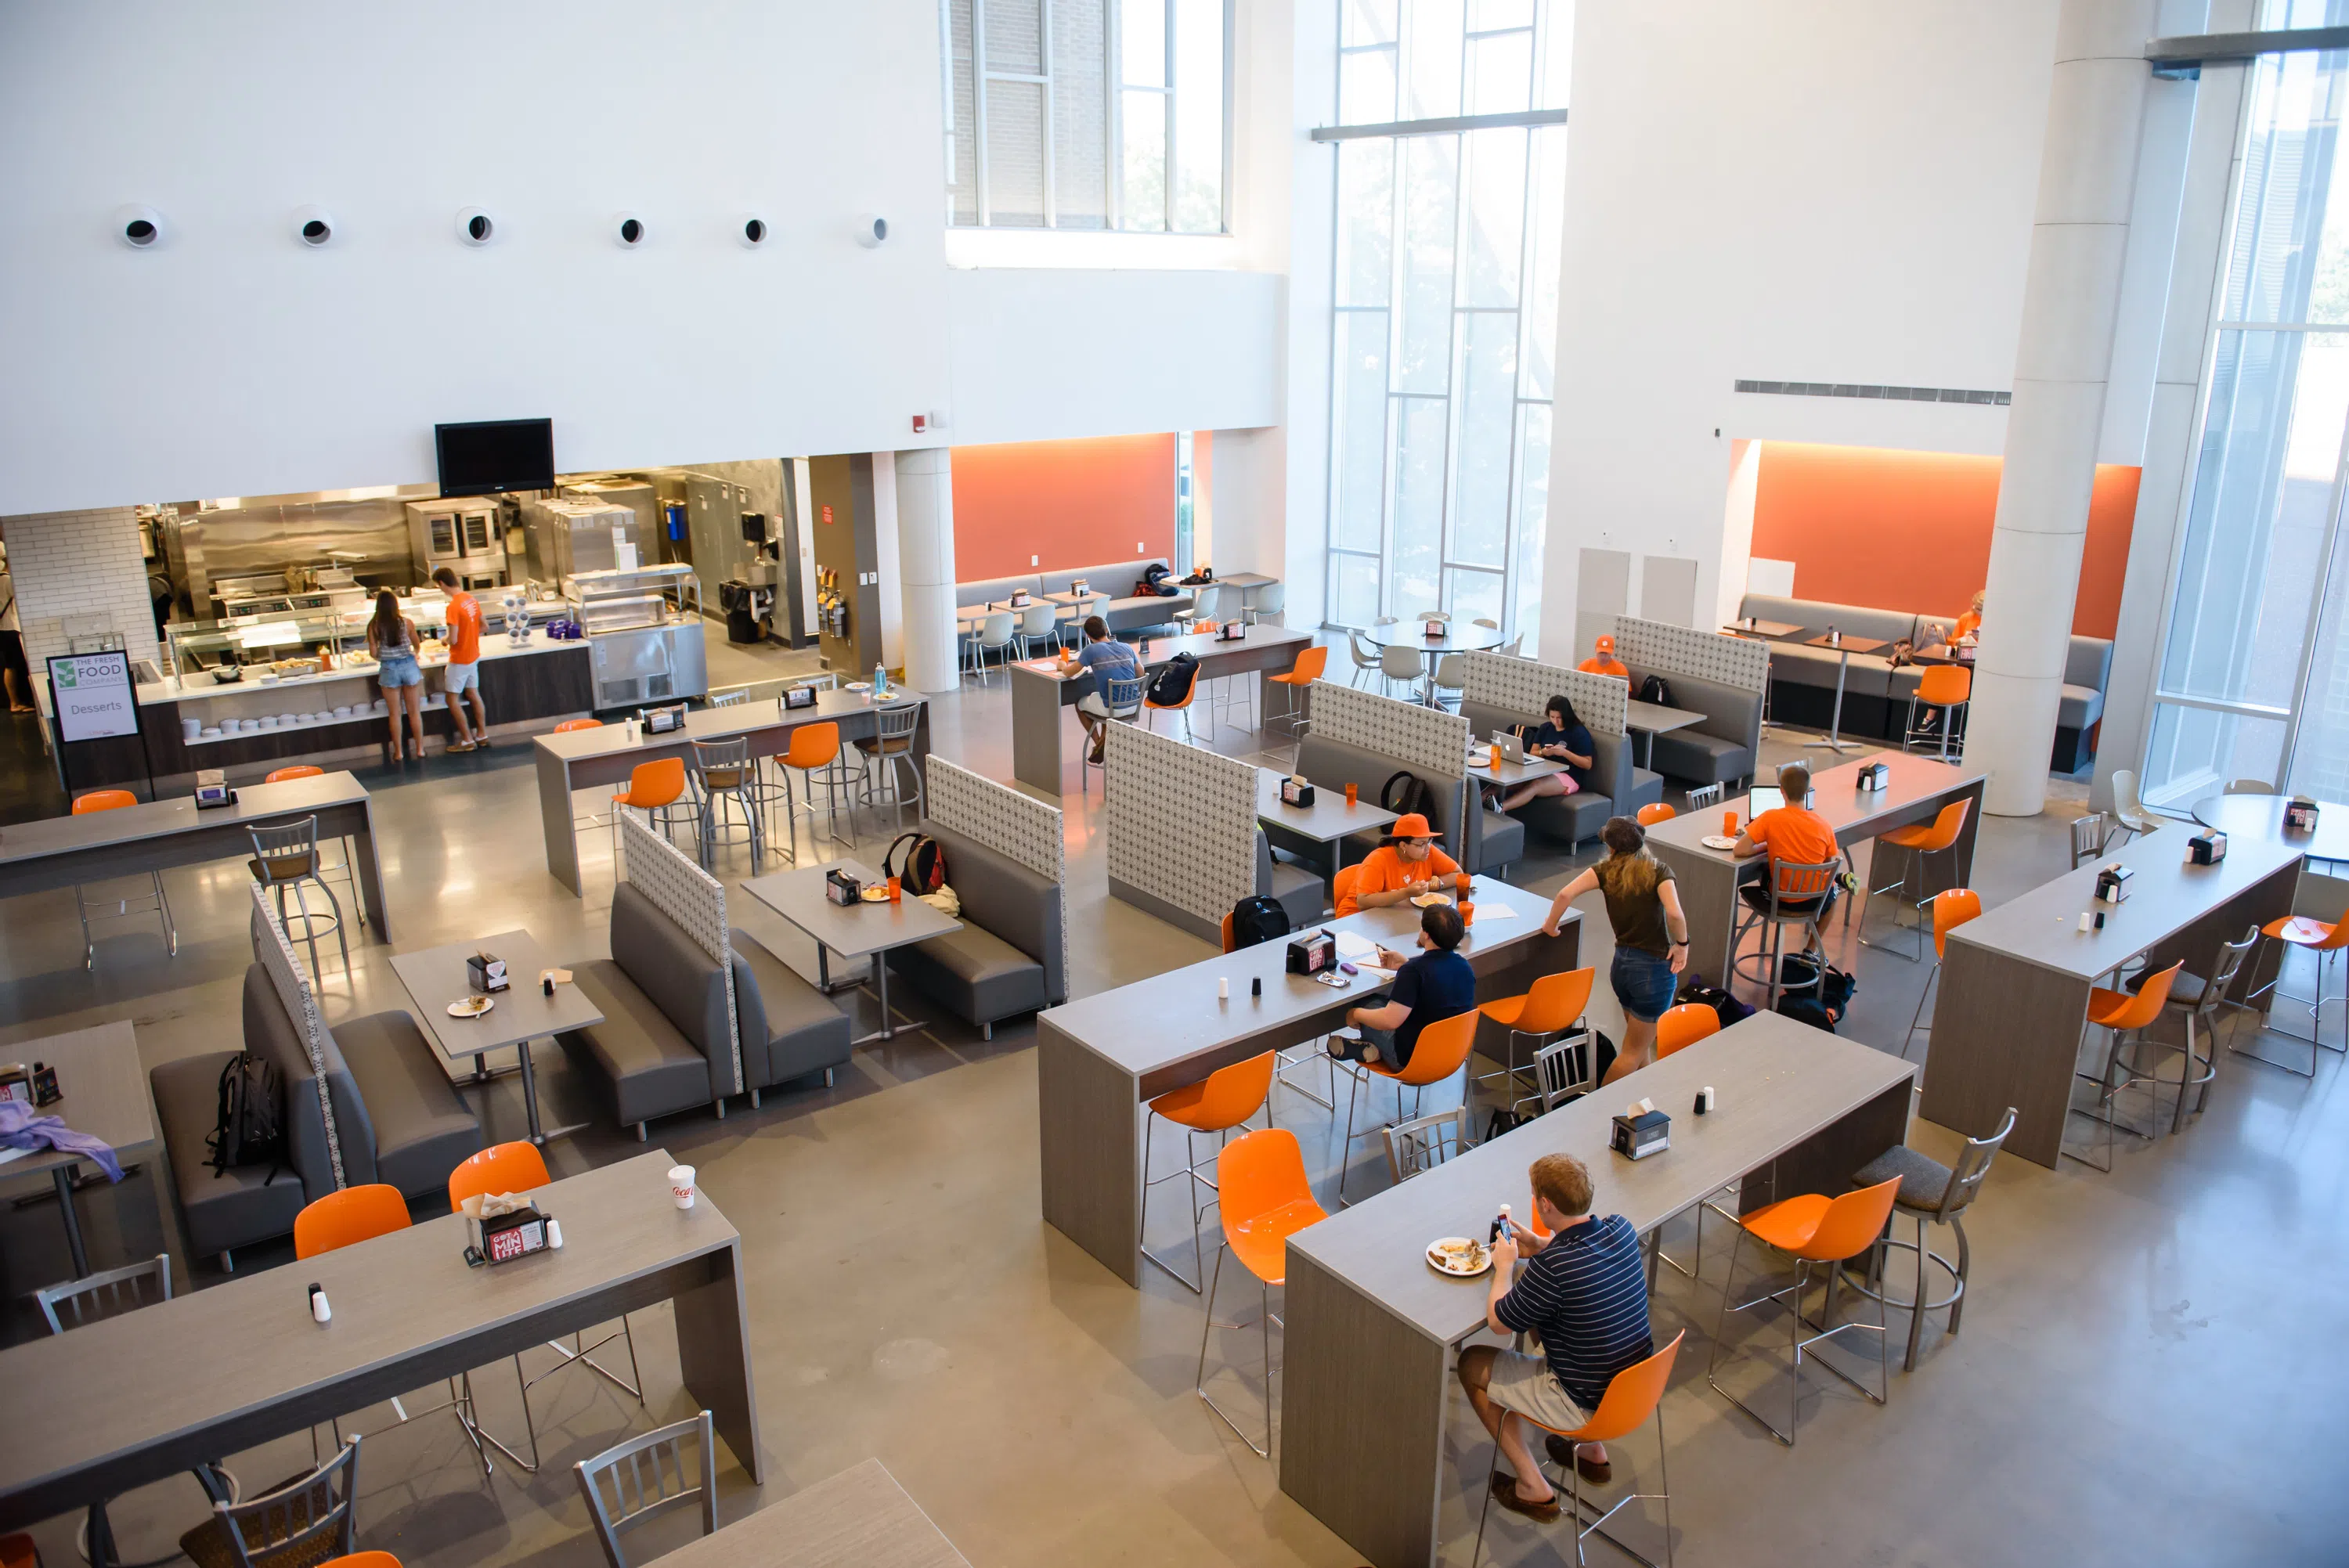 Students eat lunch in the Fresh Food Company dining hall.